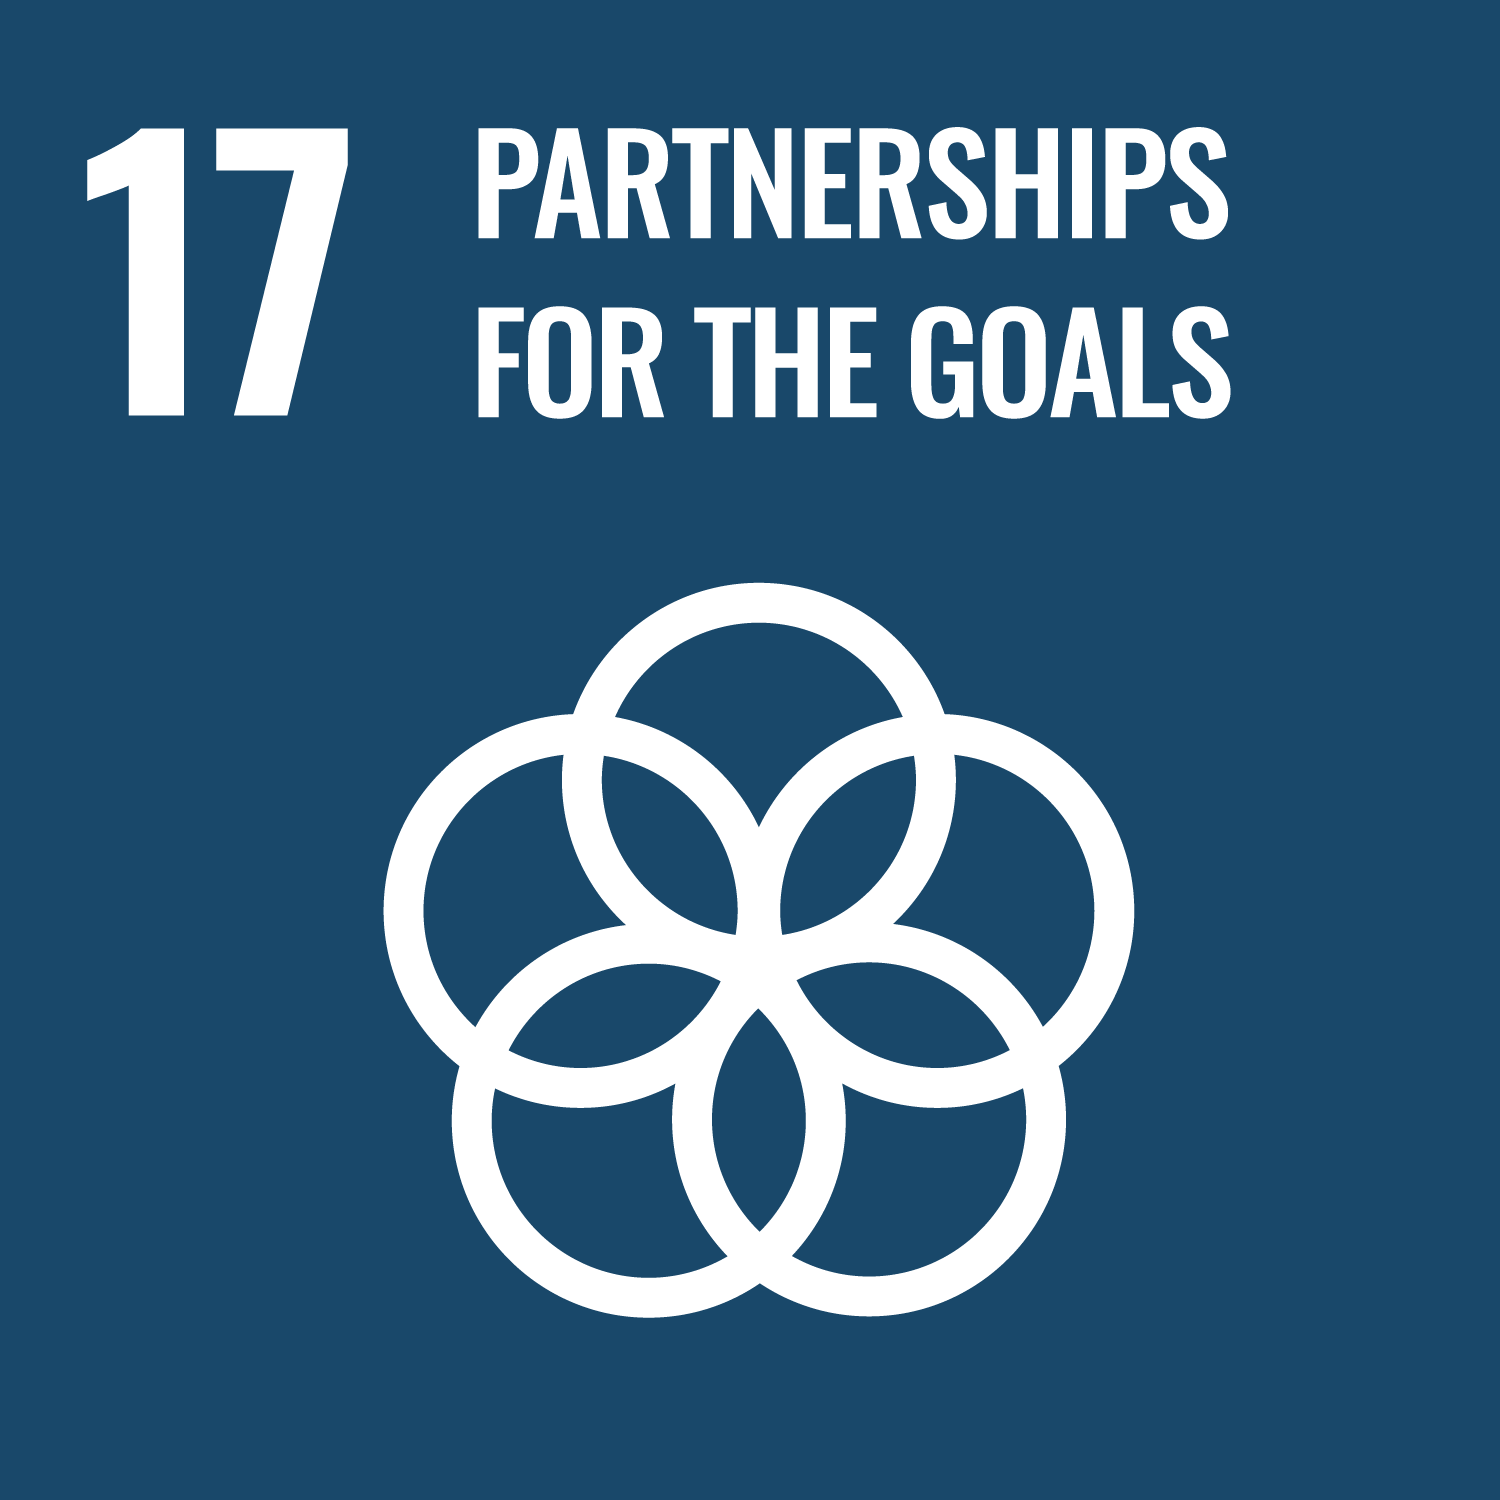 UN sustainable development goal 17 partnerships for the goals